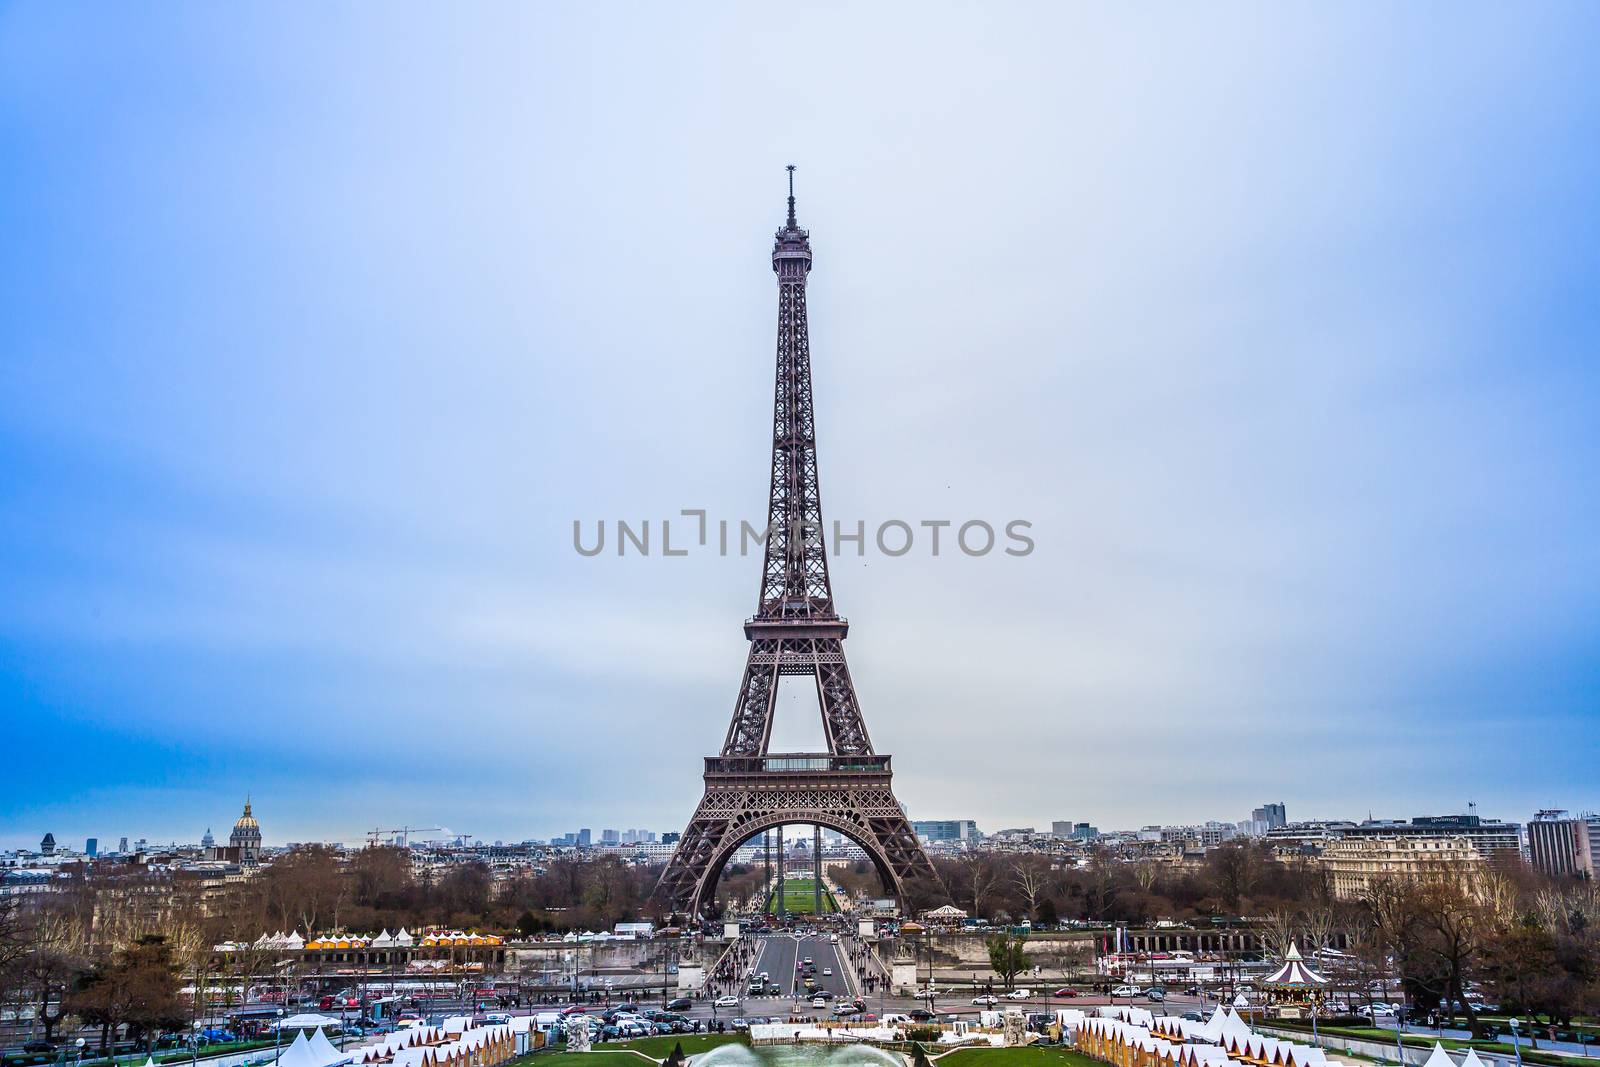 Eiffel Tower in Paris France on a beautiful sunny day